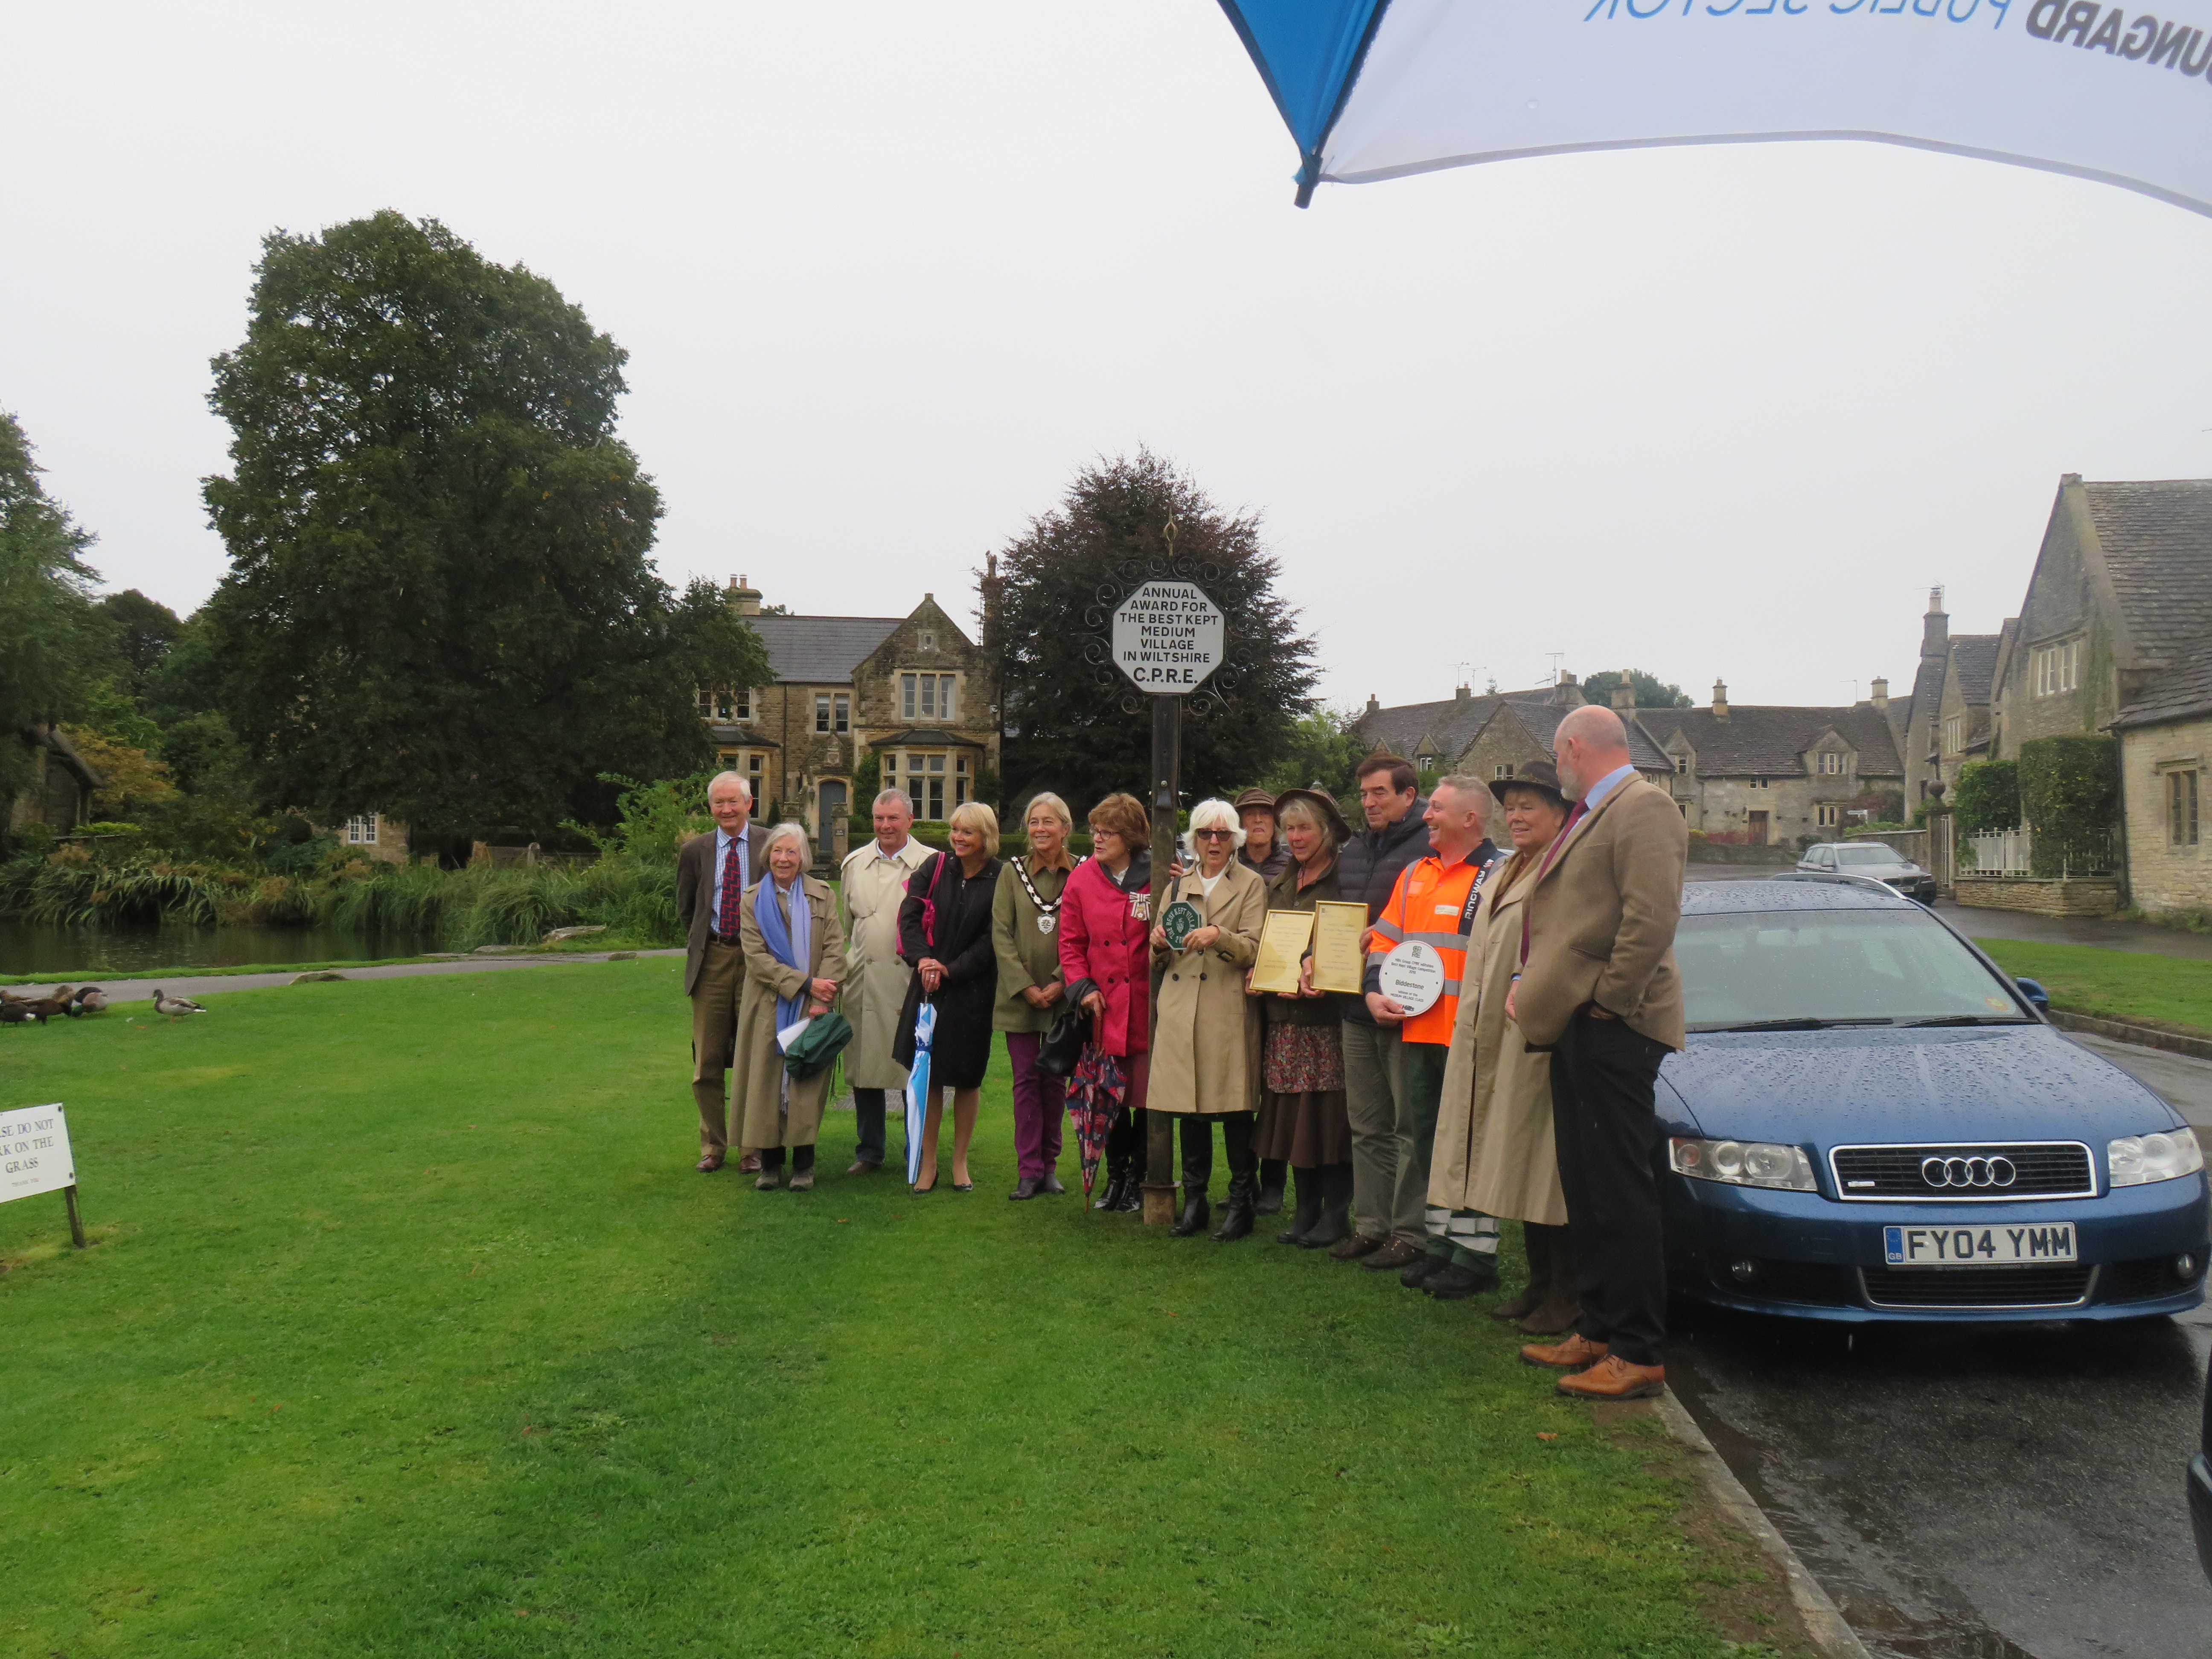 Biddestone - the presentation team, led by the Lord-Lieutenant of Wiltshire and villagers who received the awards